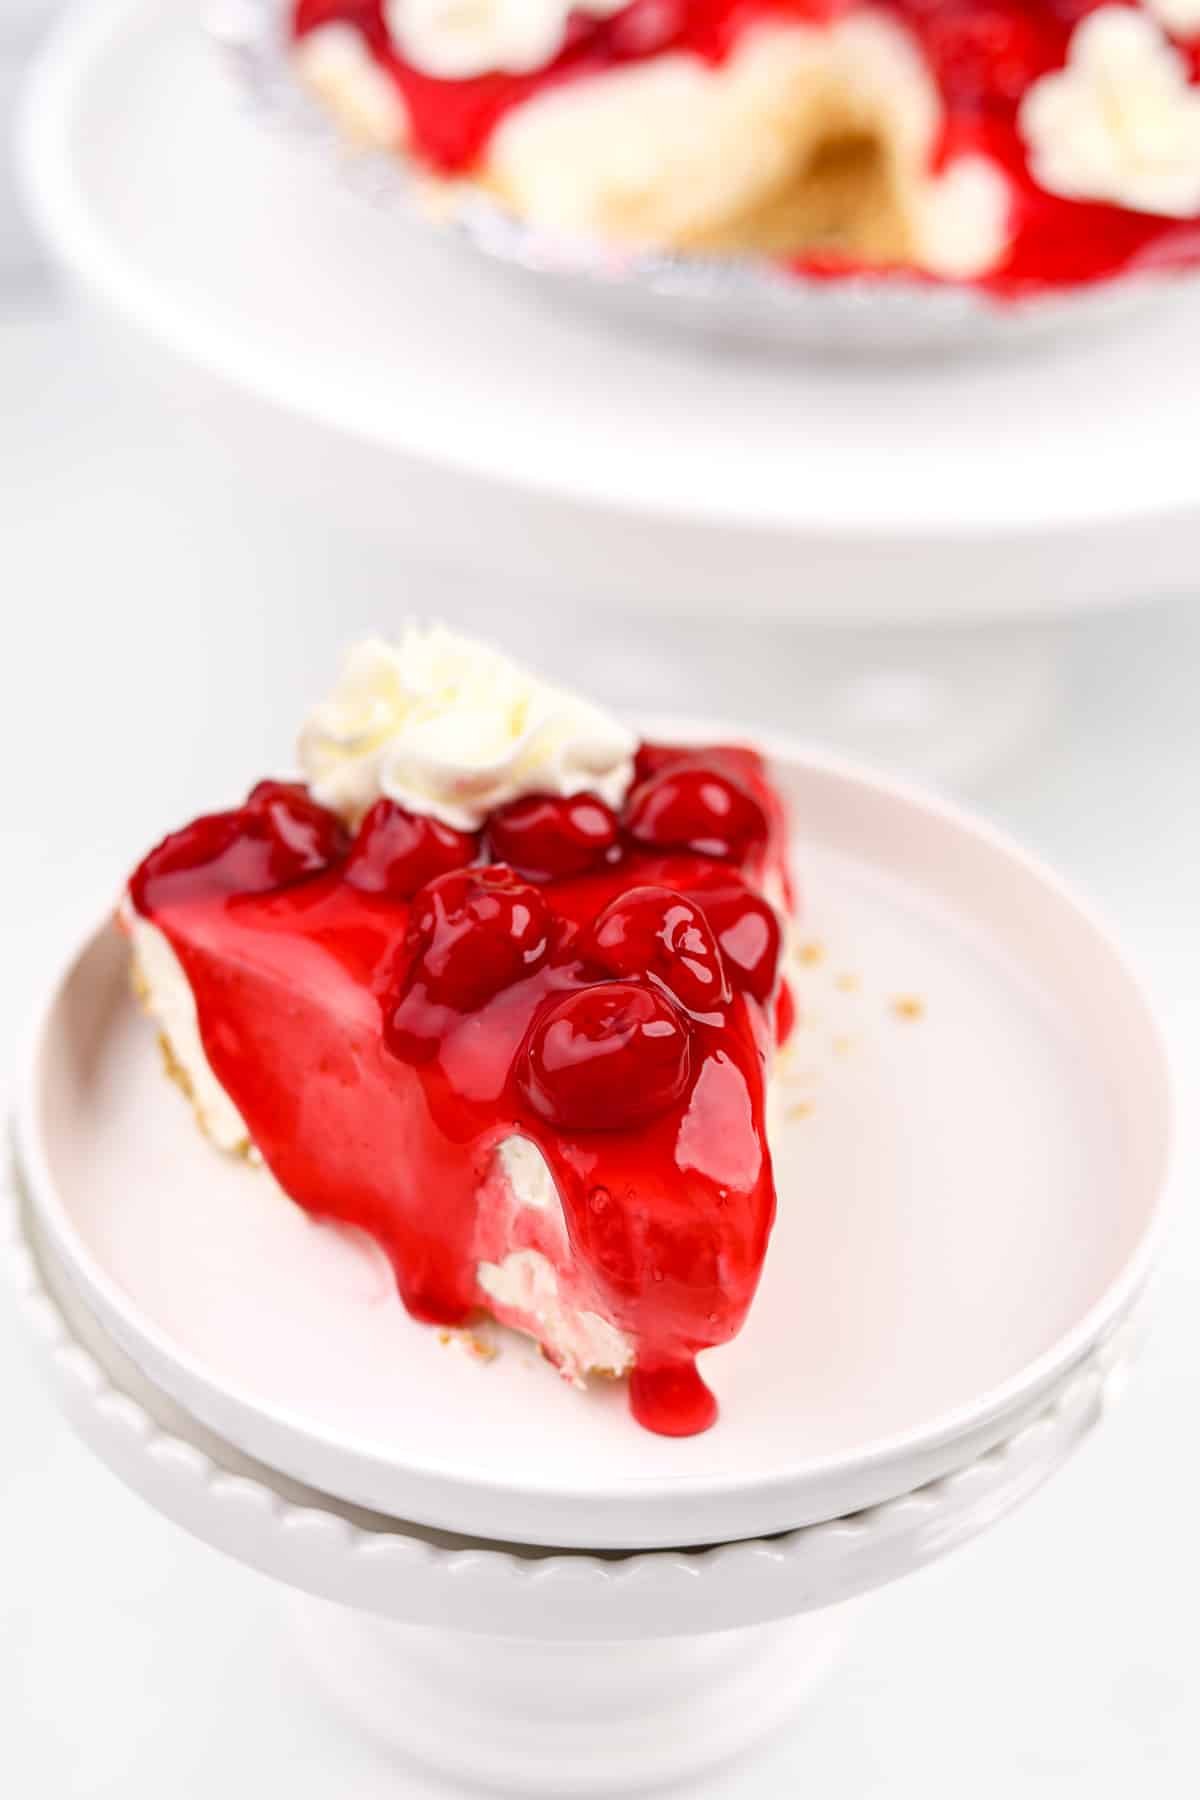 A slice of cheesecake topped with cherries and a glaze.